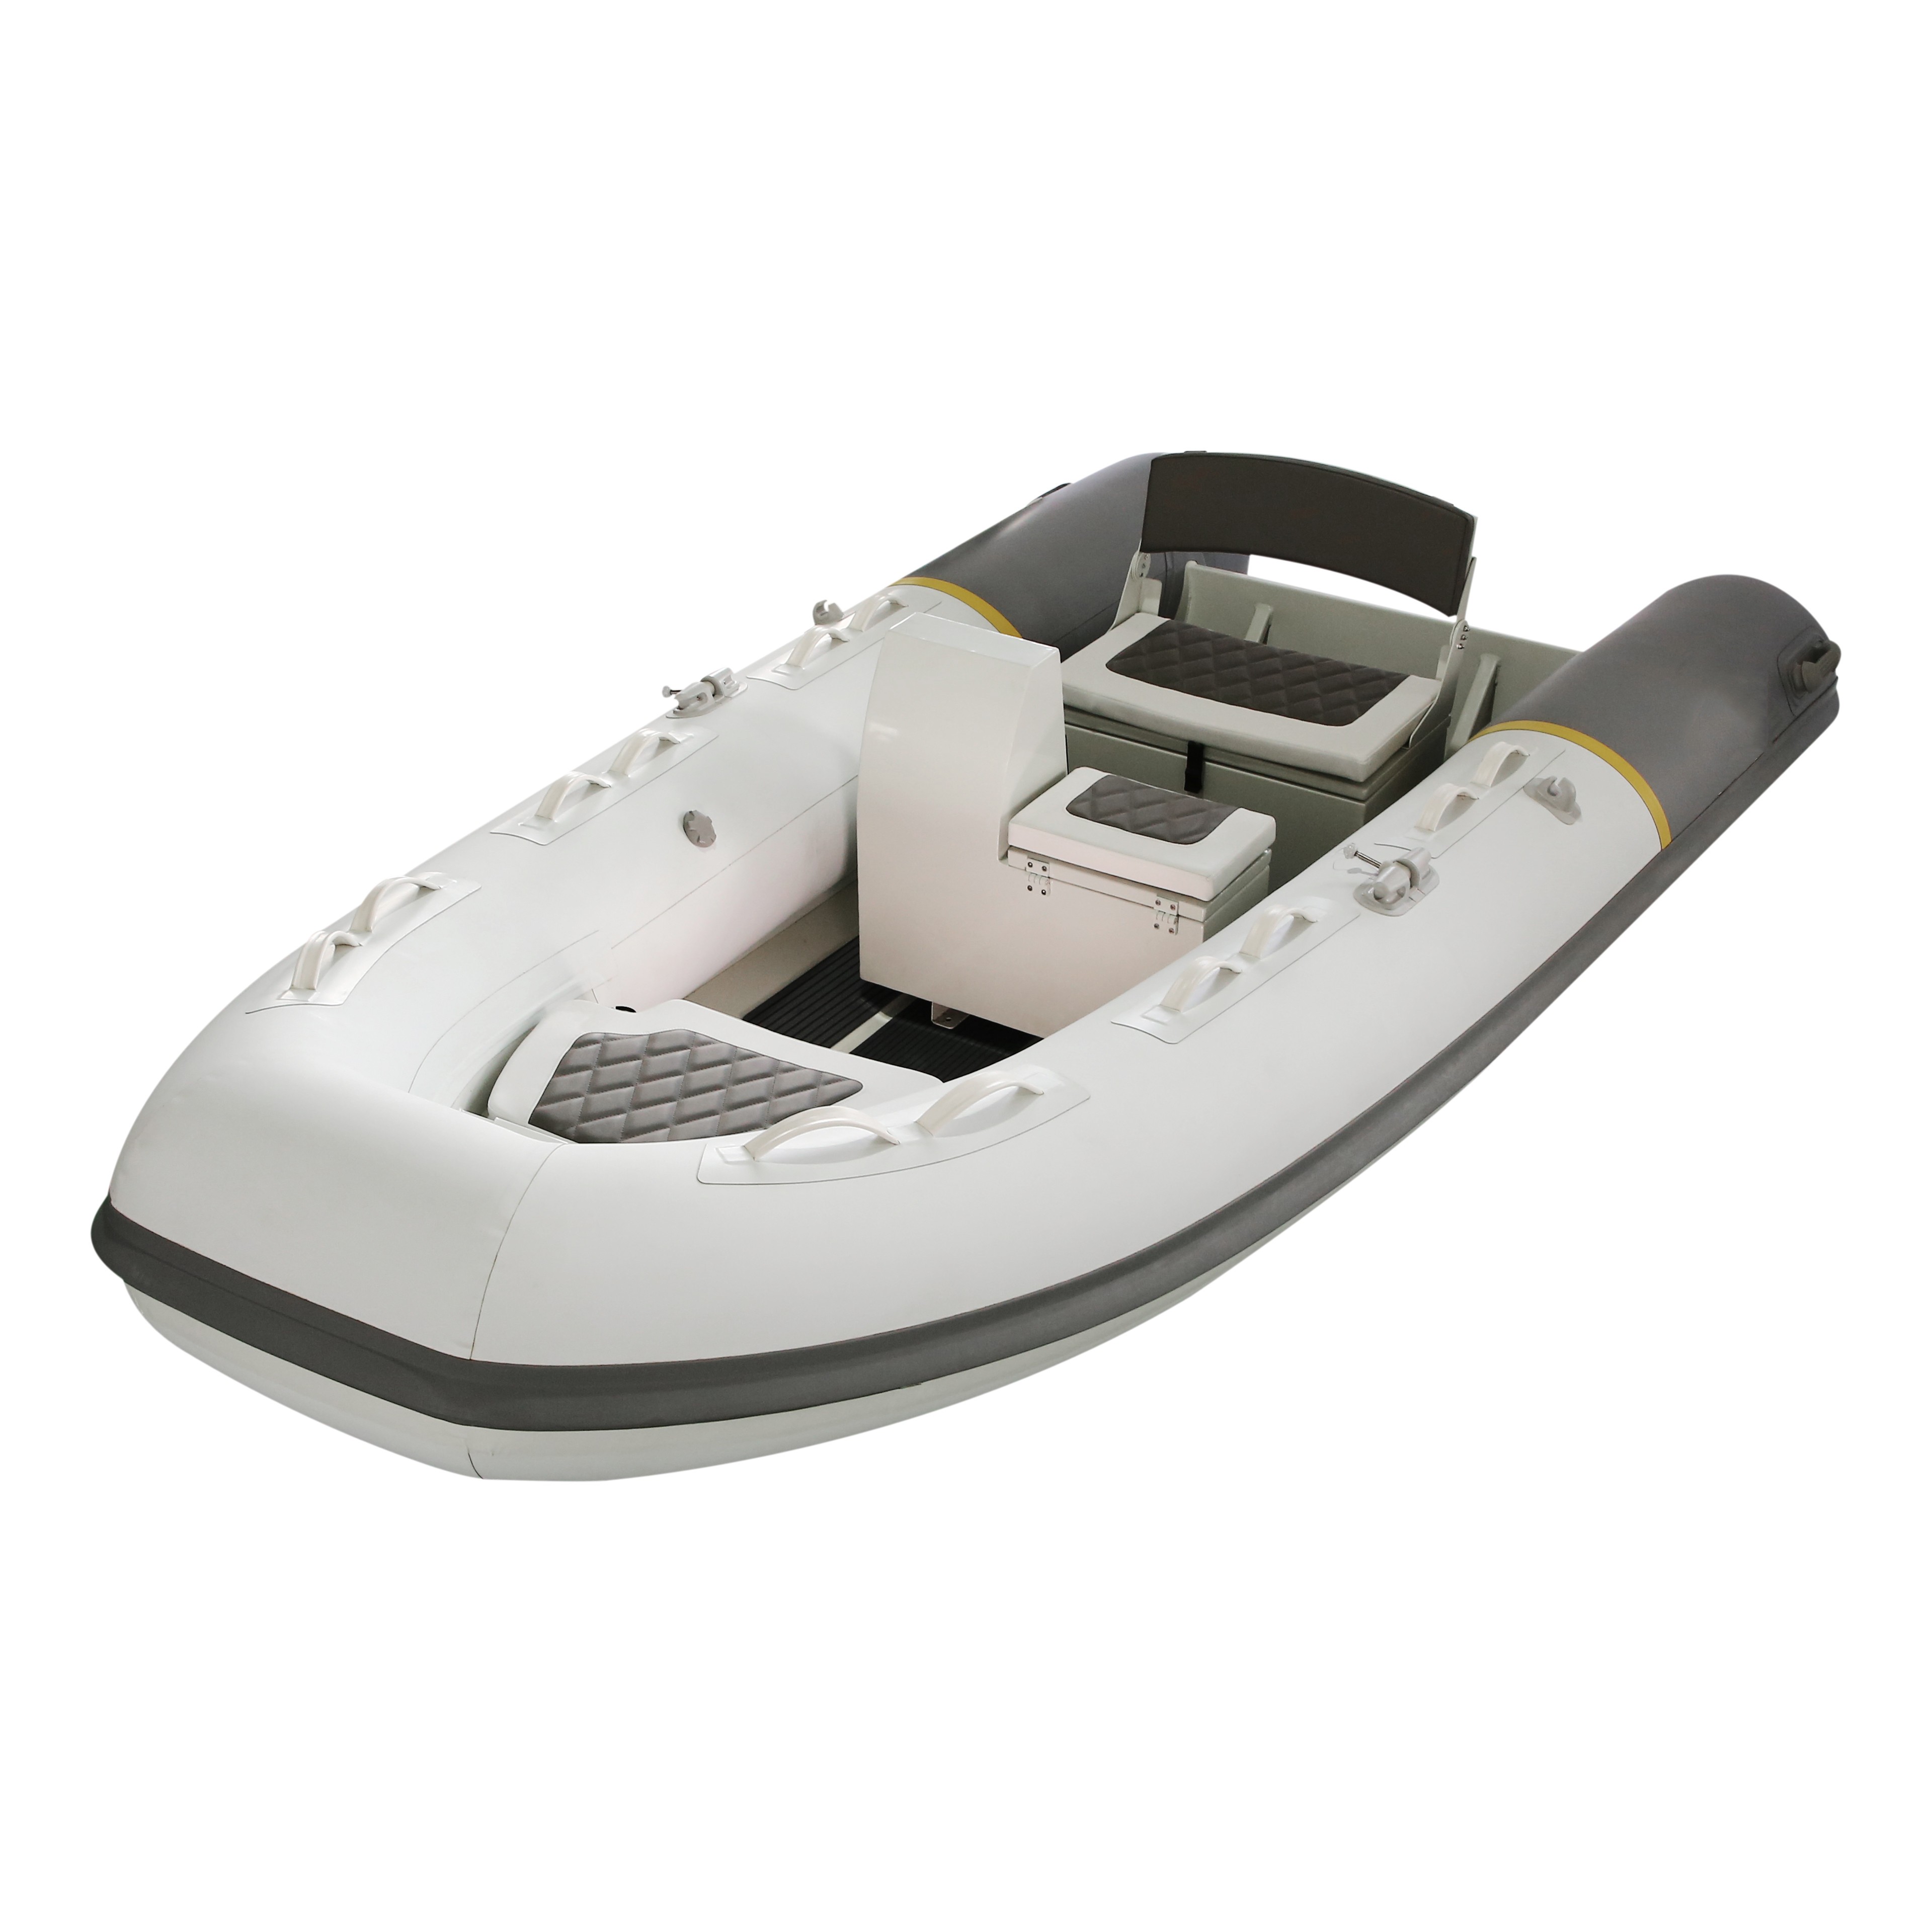 Best dinghy boats